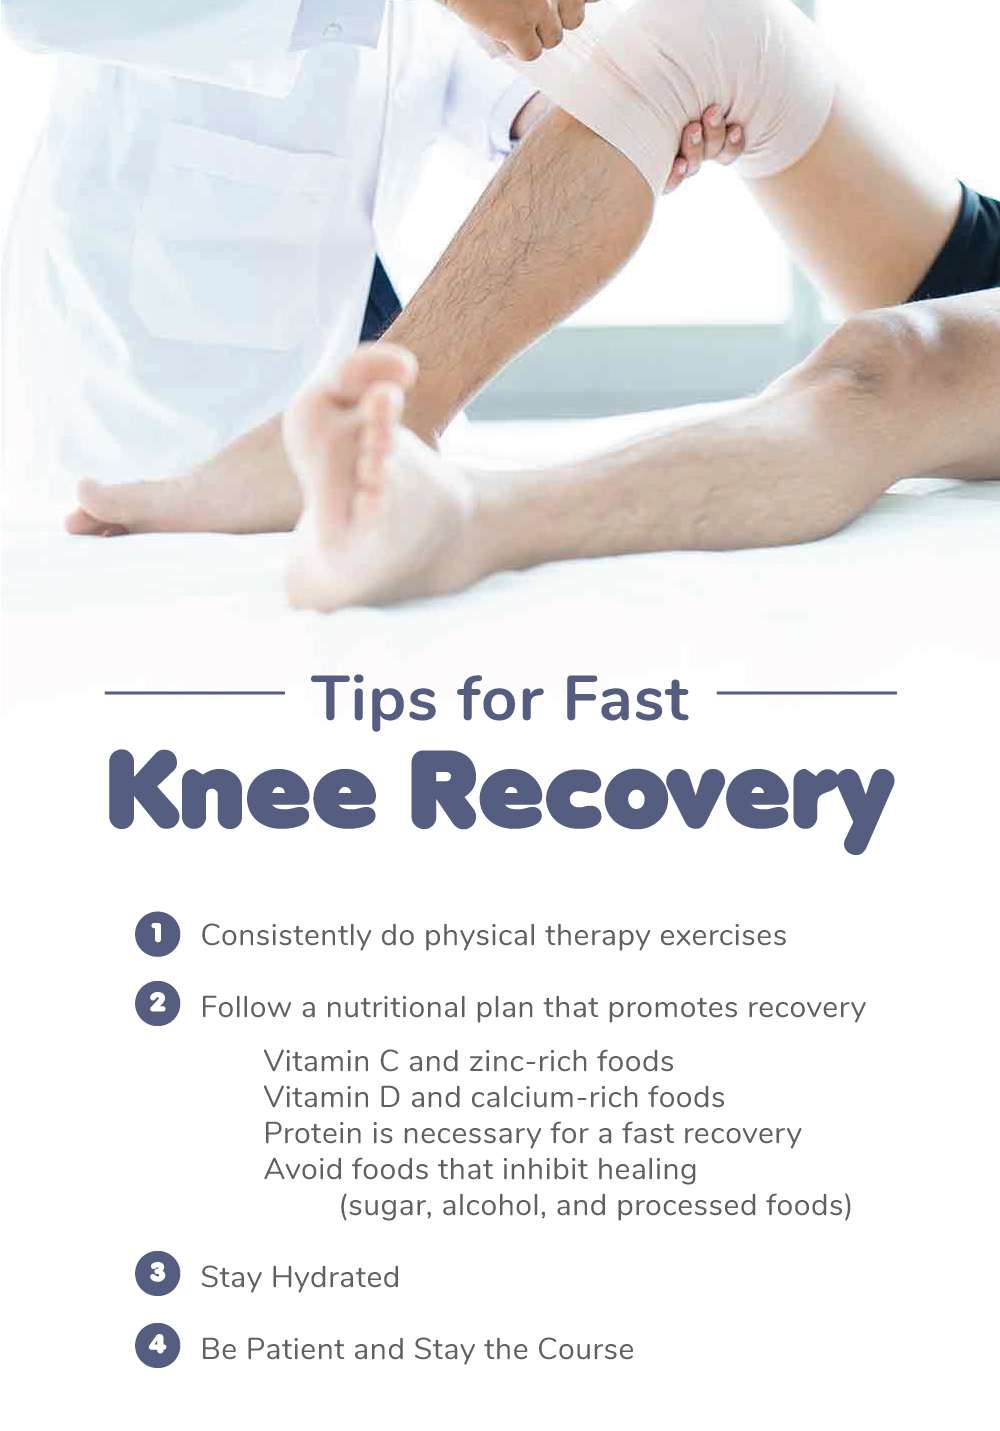 Knee Surgery Recovery: Tips for Fast Recovery